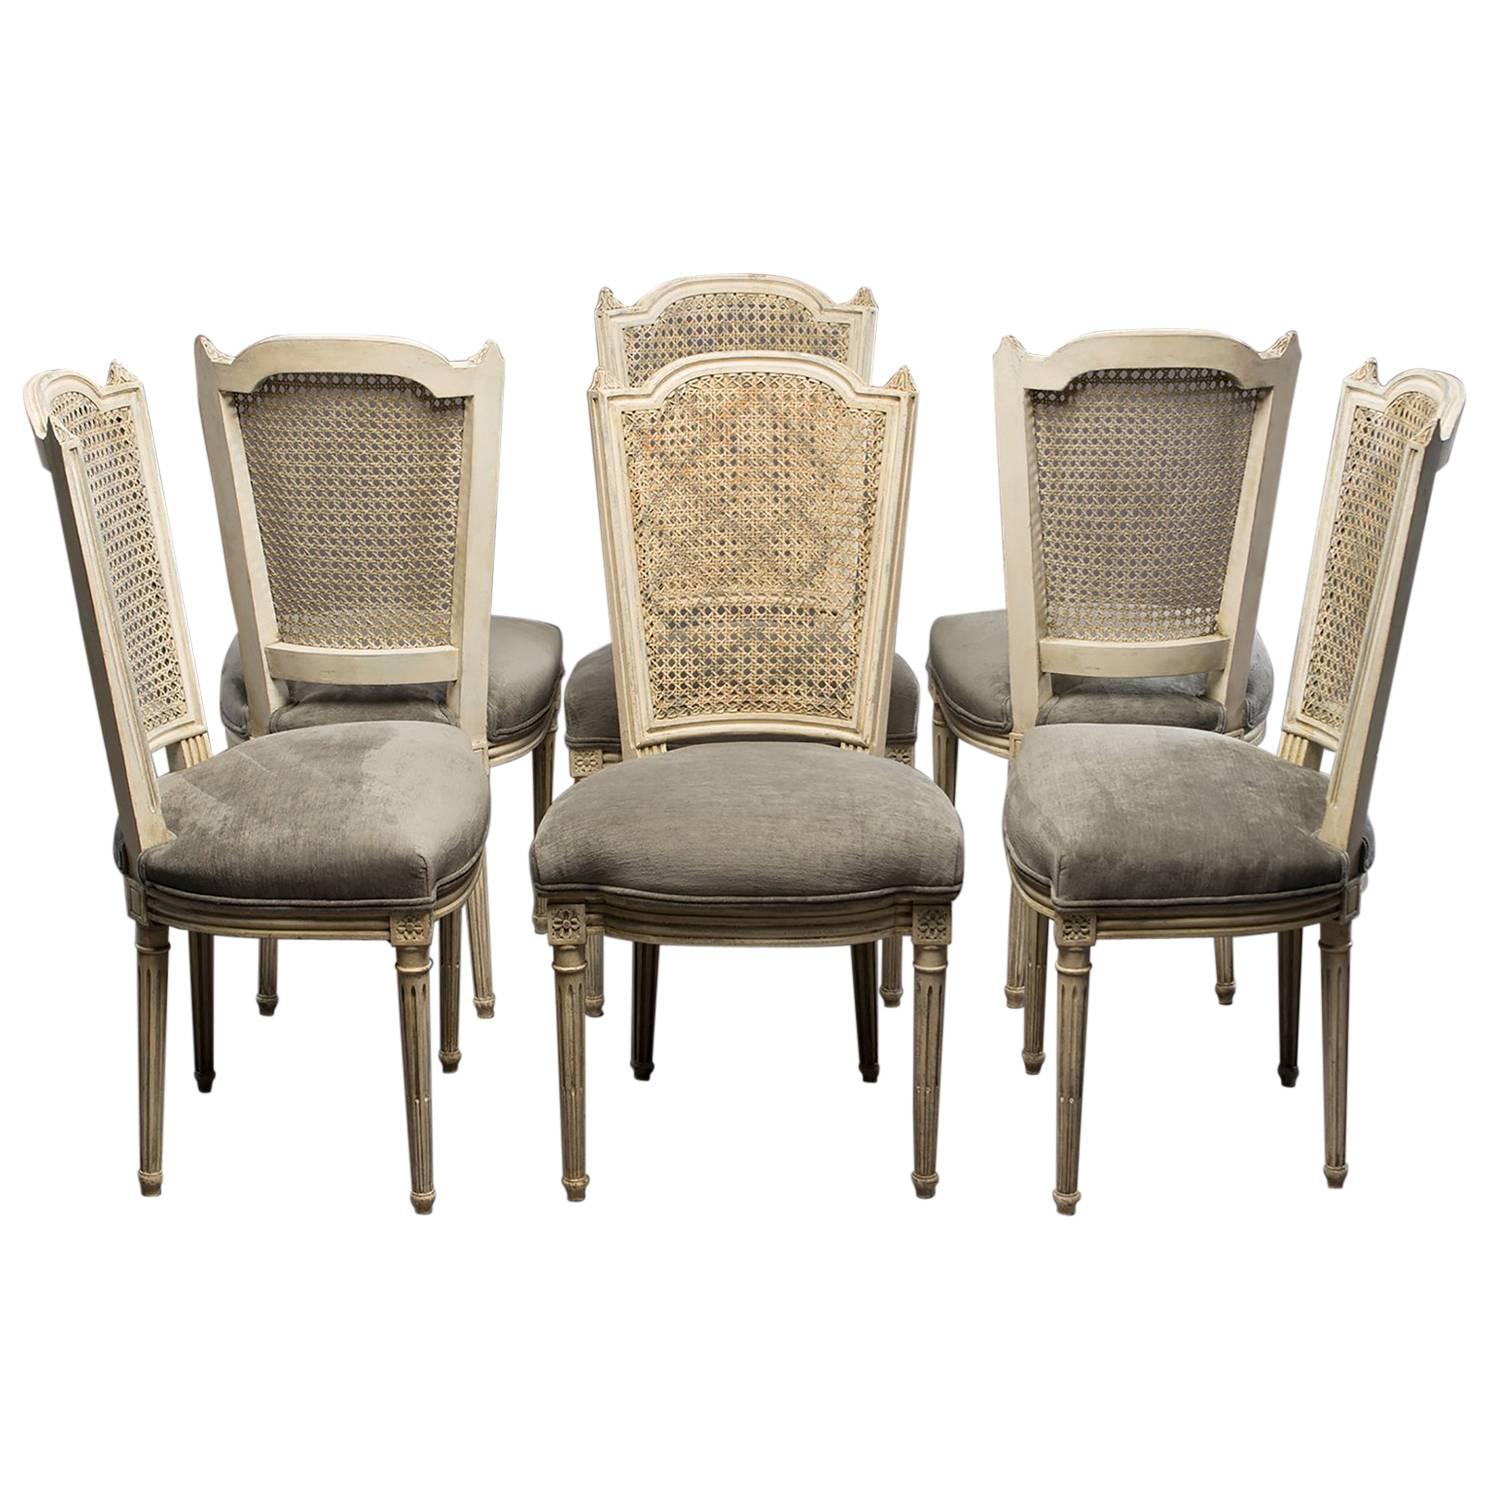 Set of Six French Painted and Caned Back Chairs